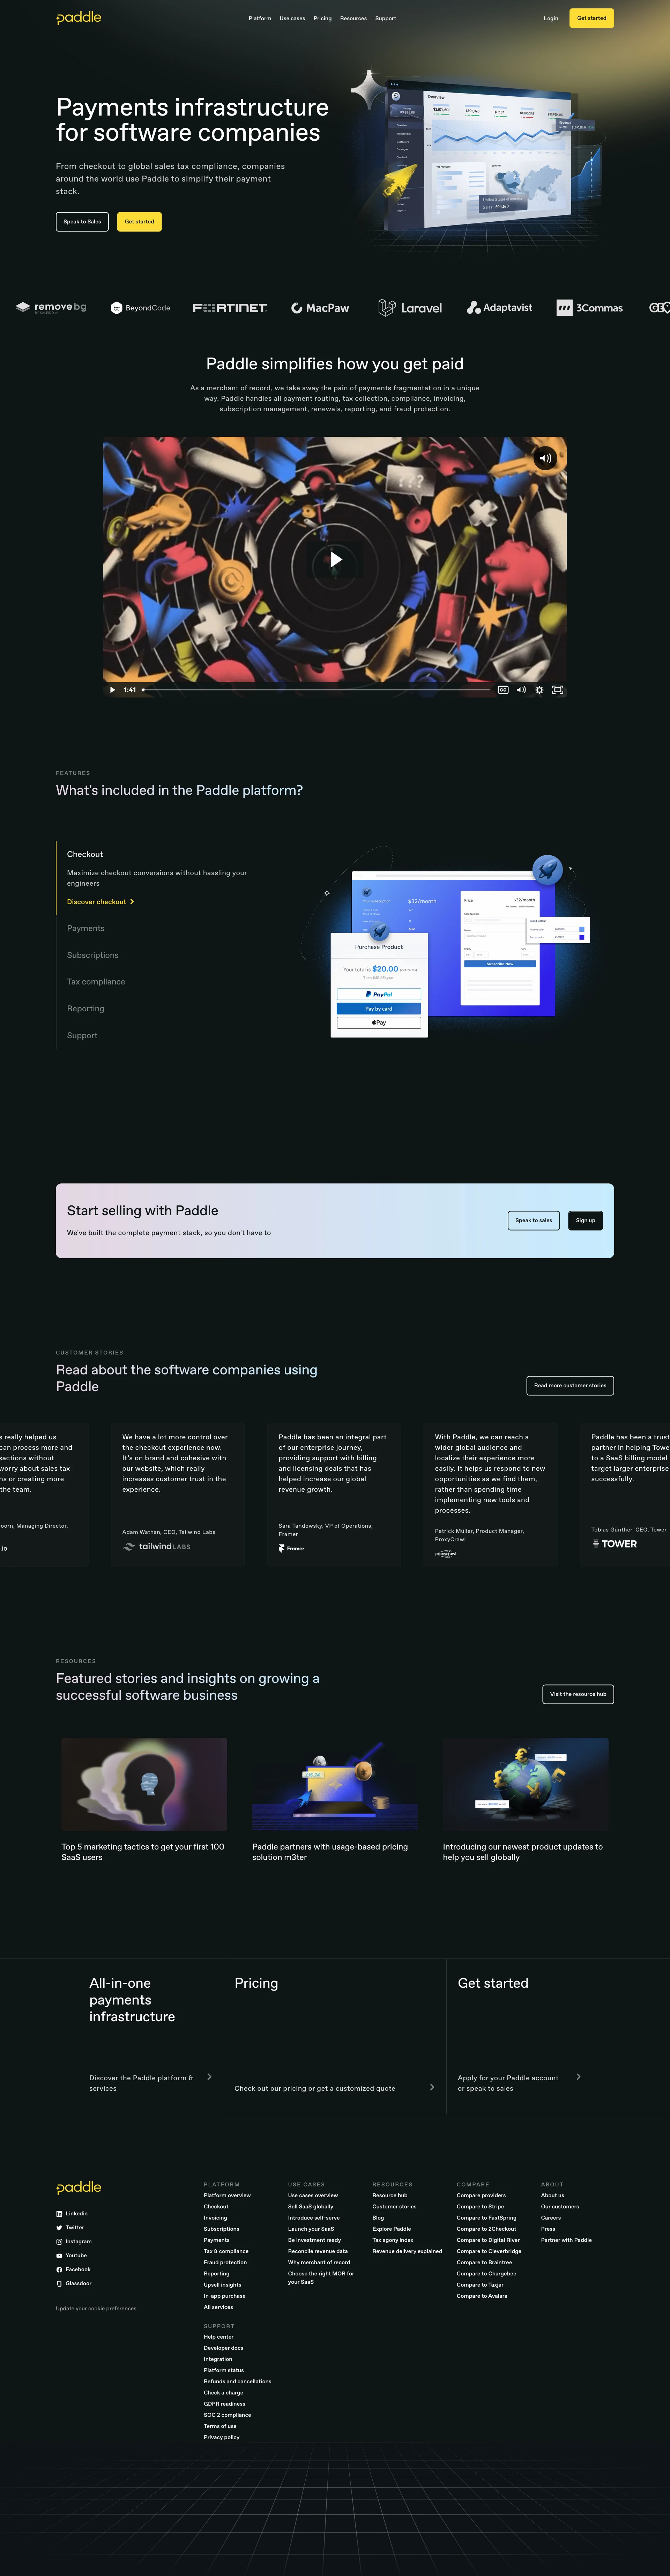 Paddle Landing Page Example: Payments infrastructure for software companies. From checkout to global sales tax compliance, companies around the world use Paddle to simplify their payment stack.